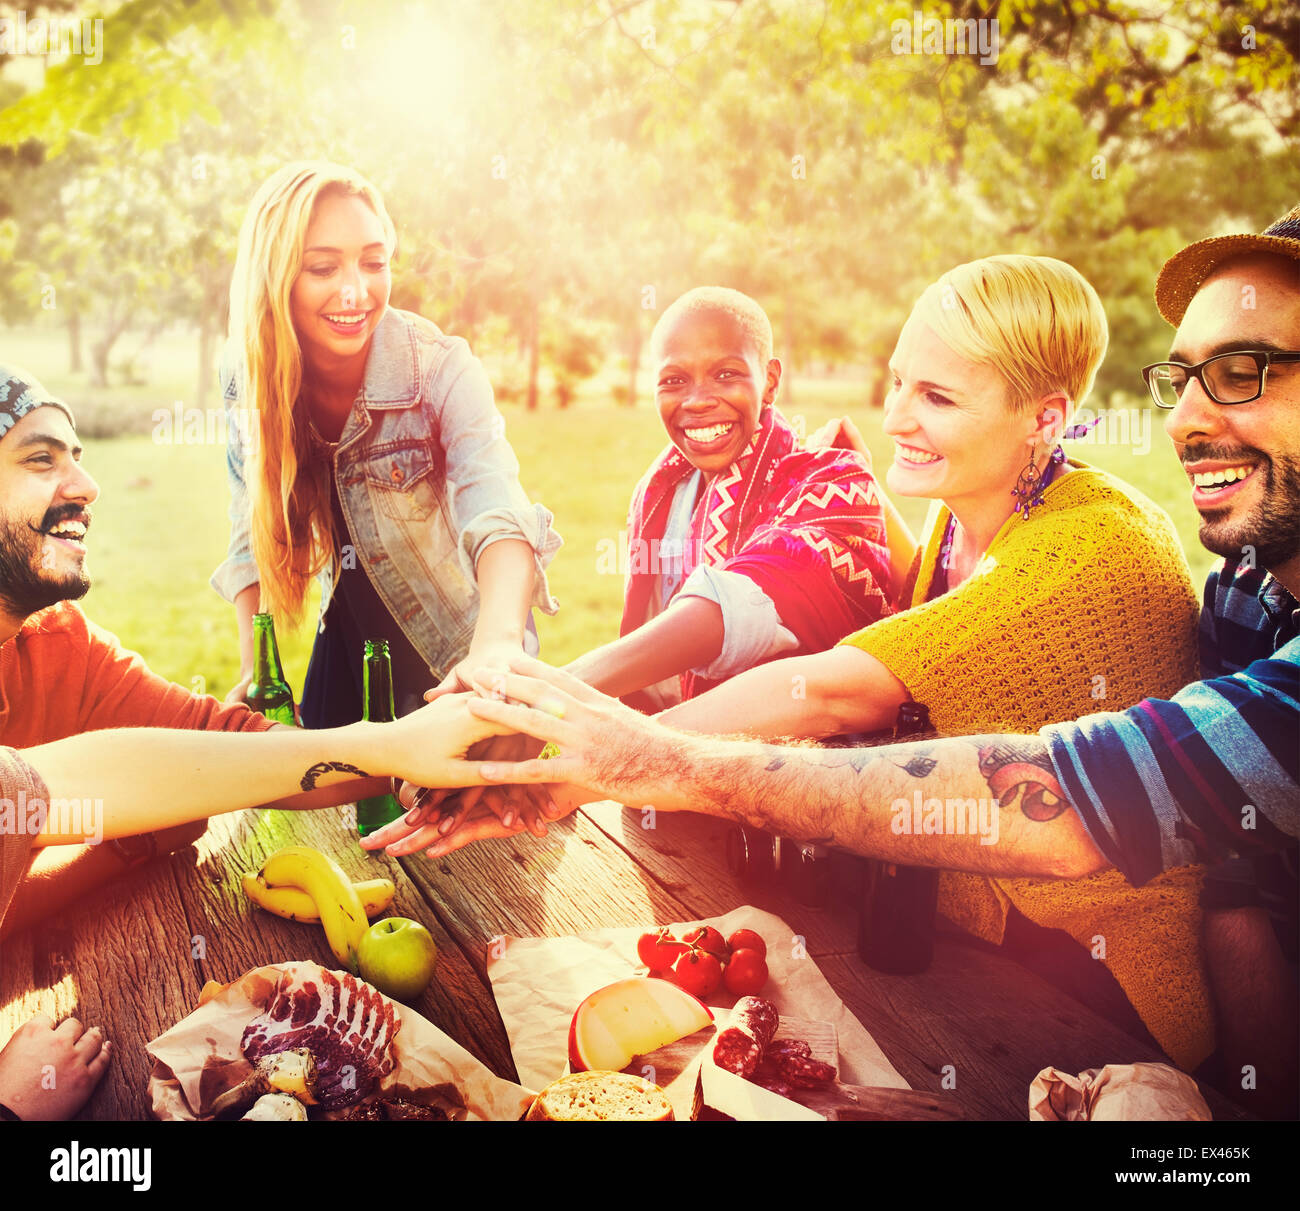 Friends Outdoors Camping Teamwork Unity Concept Stock Photo